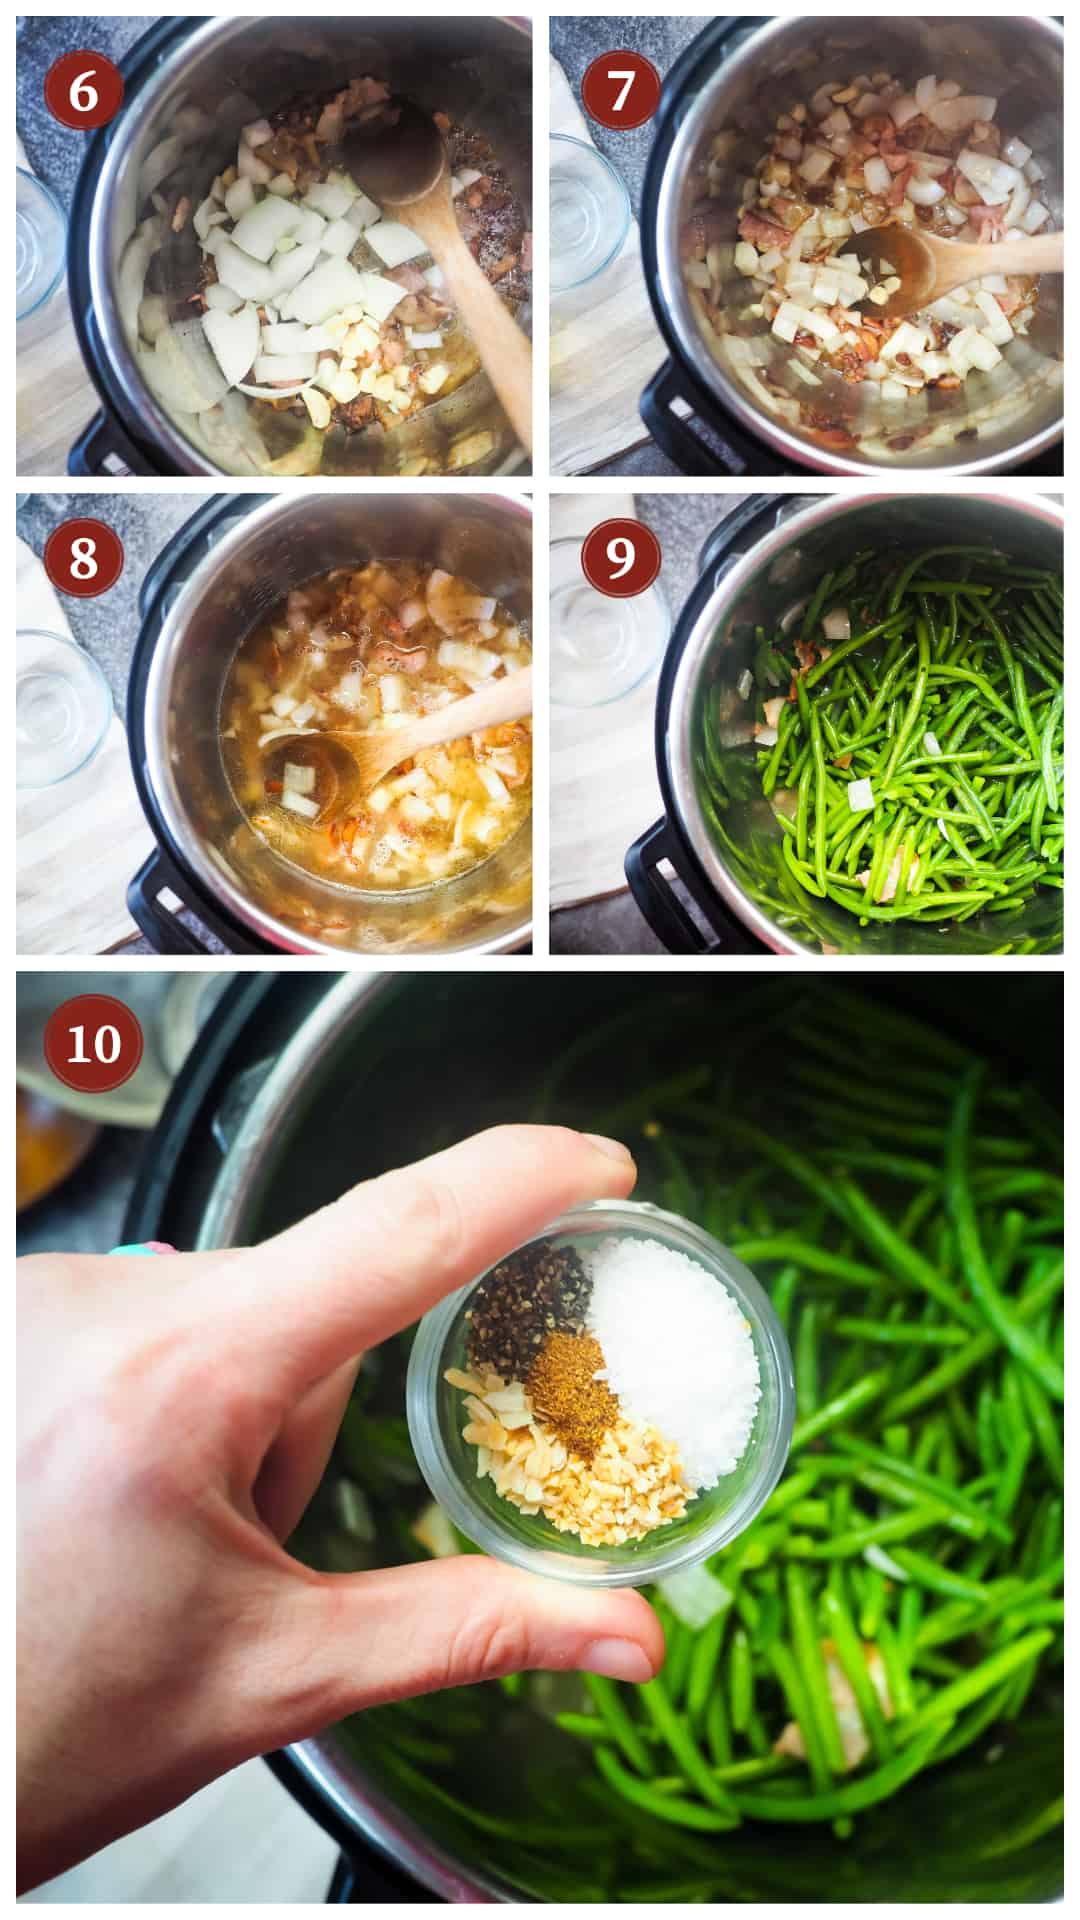 A collage of images showing the process of making southern green beans in an Instant Pot, steps 6 - 10.